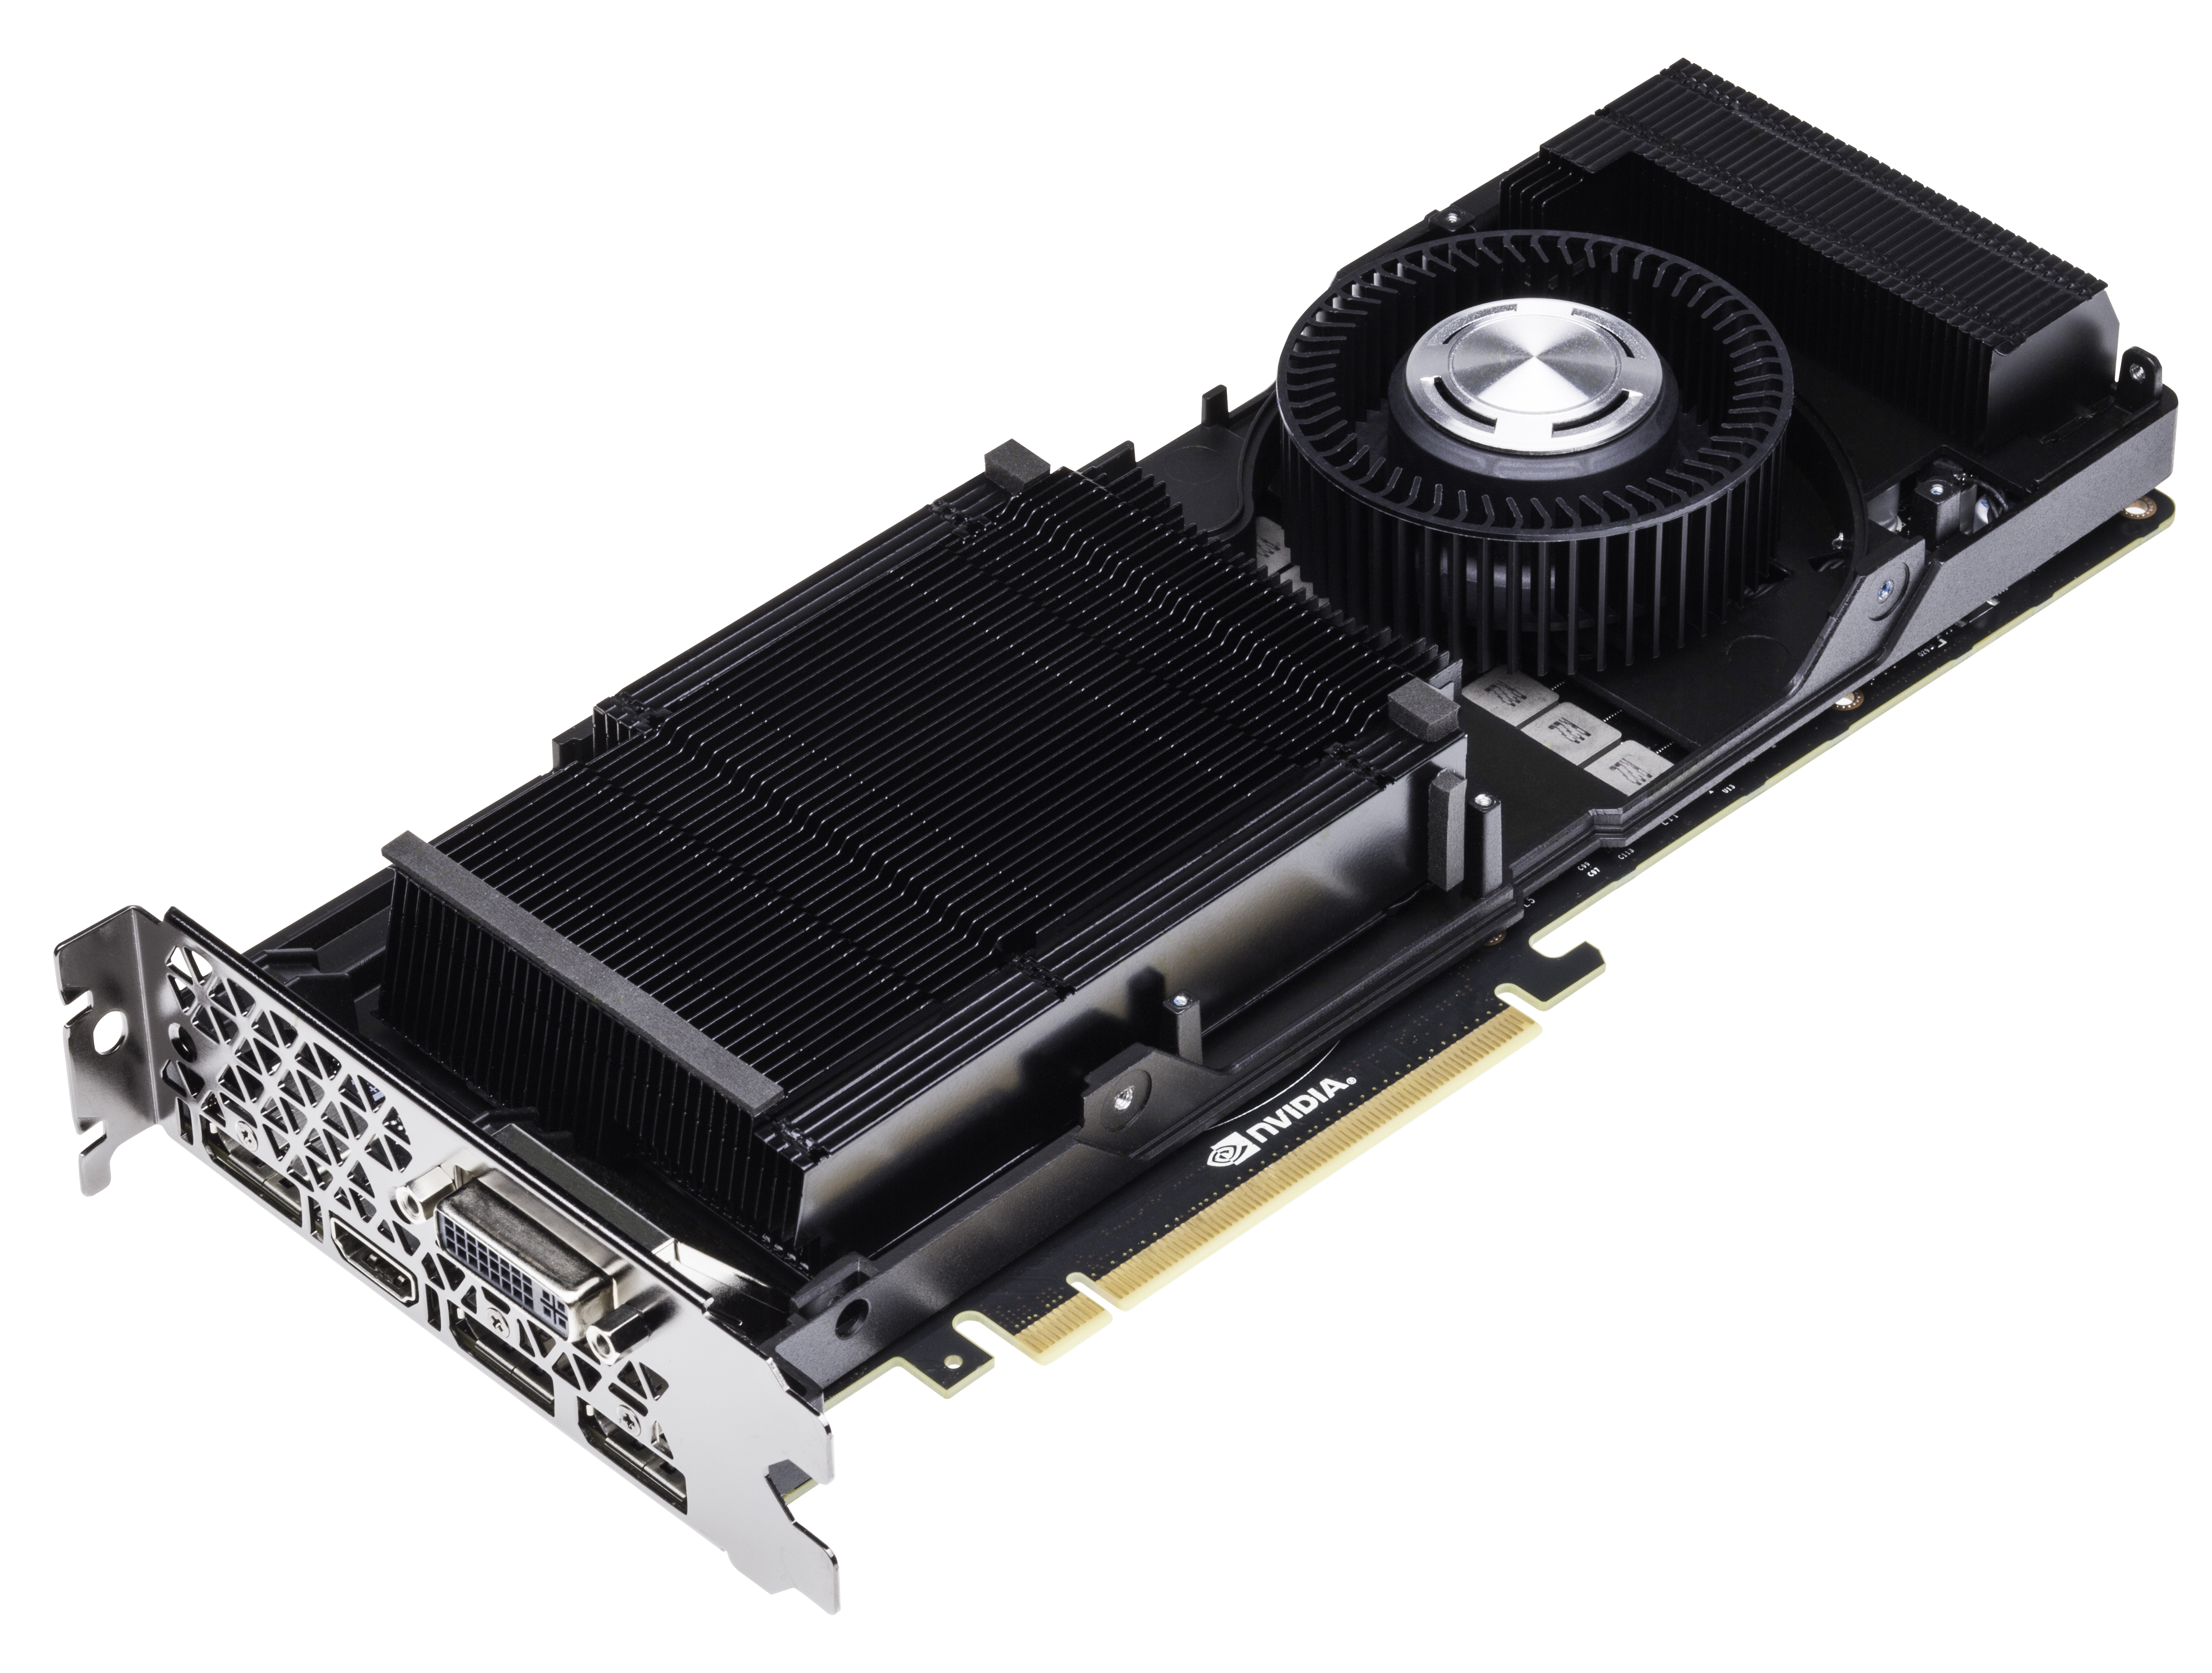 The NVIDIA GeForce GTX 980 Ti Review